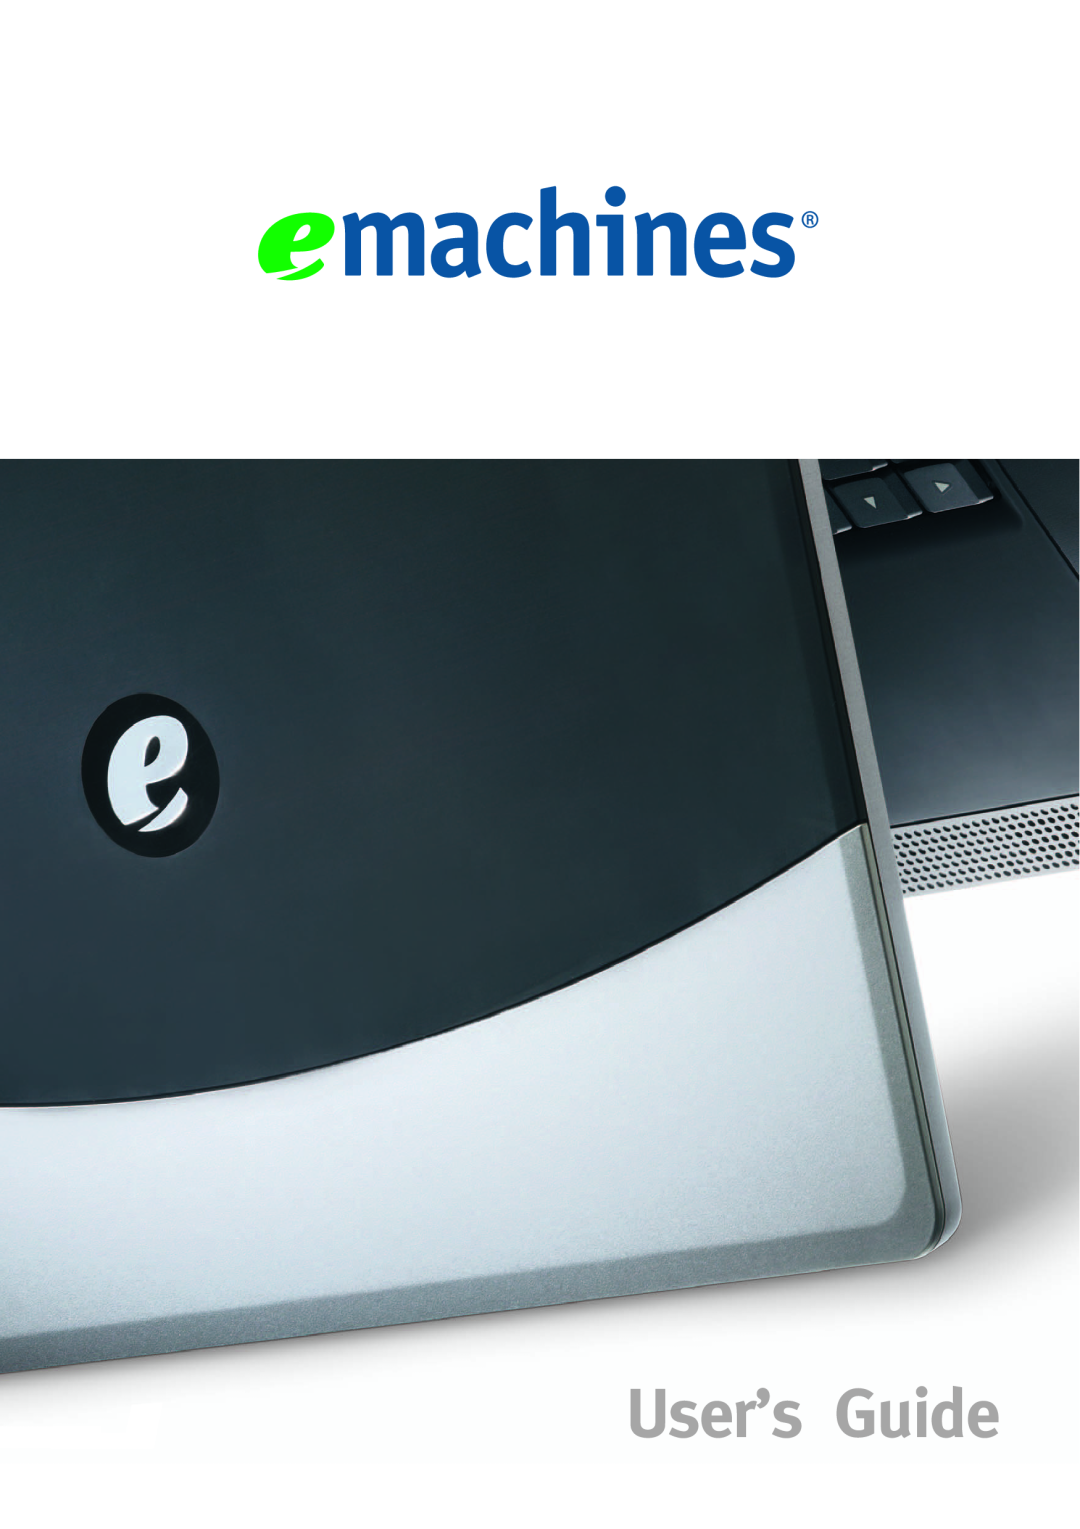 eMachines AAFW53700001K0 manual User’s Guide 